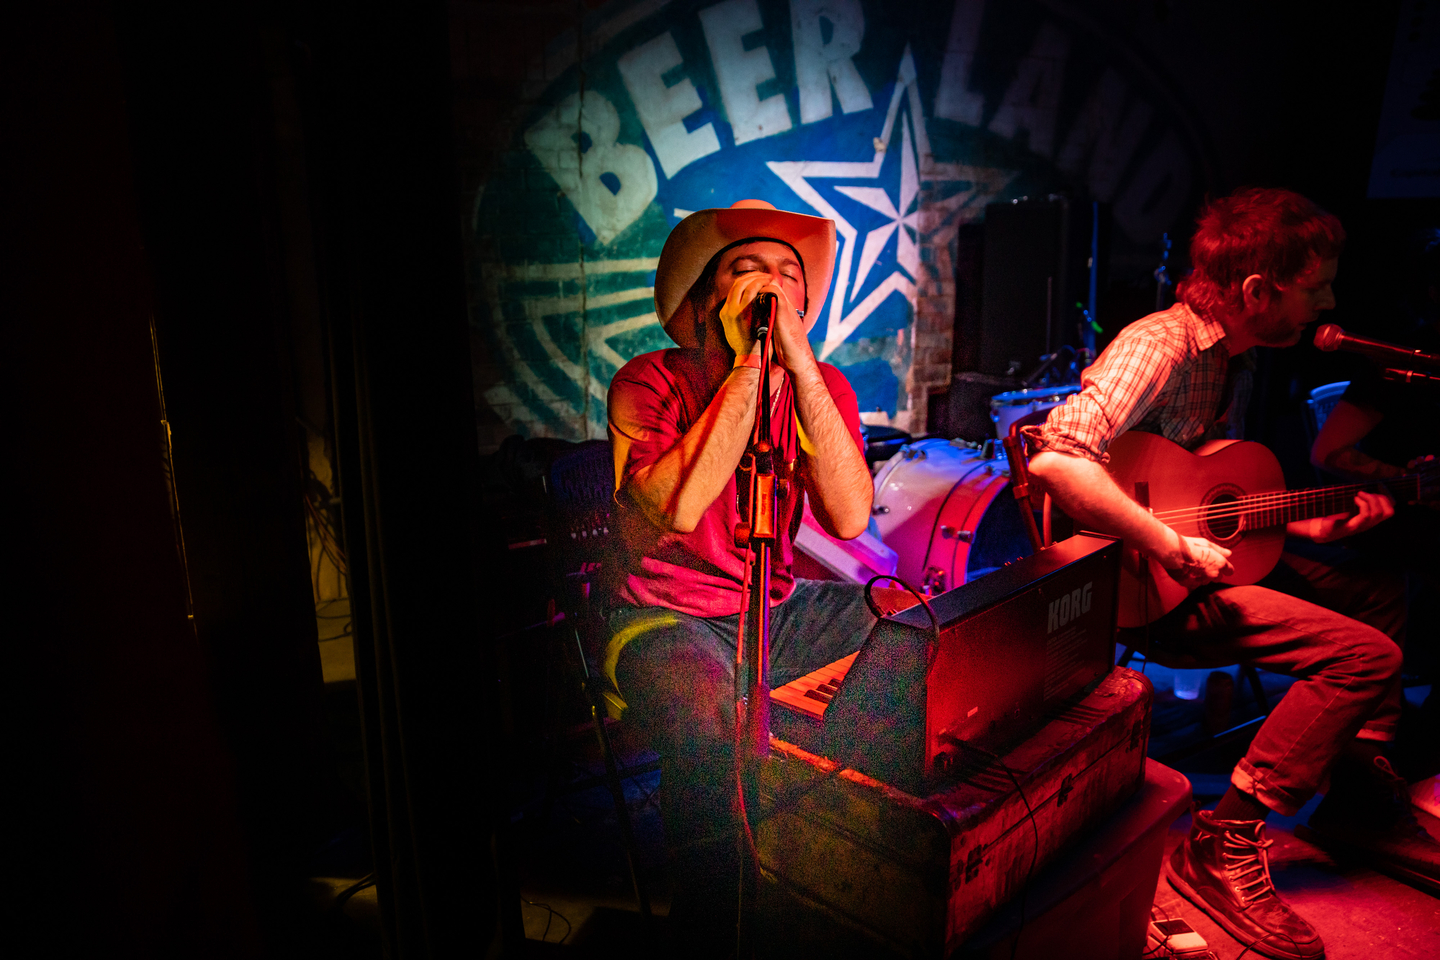 Aquarian Blood at Beerland, presented by Goner Records – Photo by Cris DeWitt